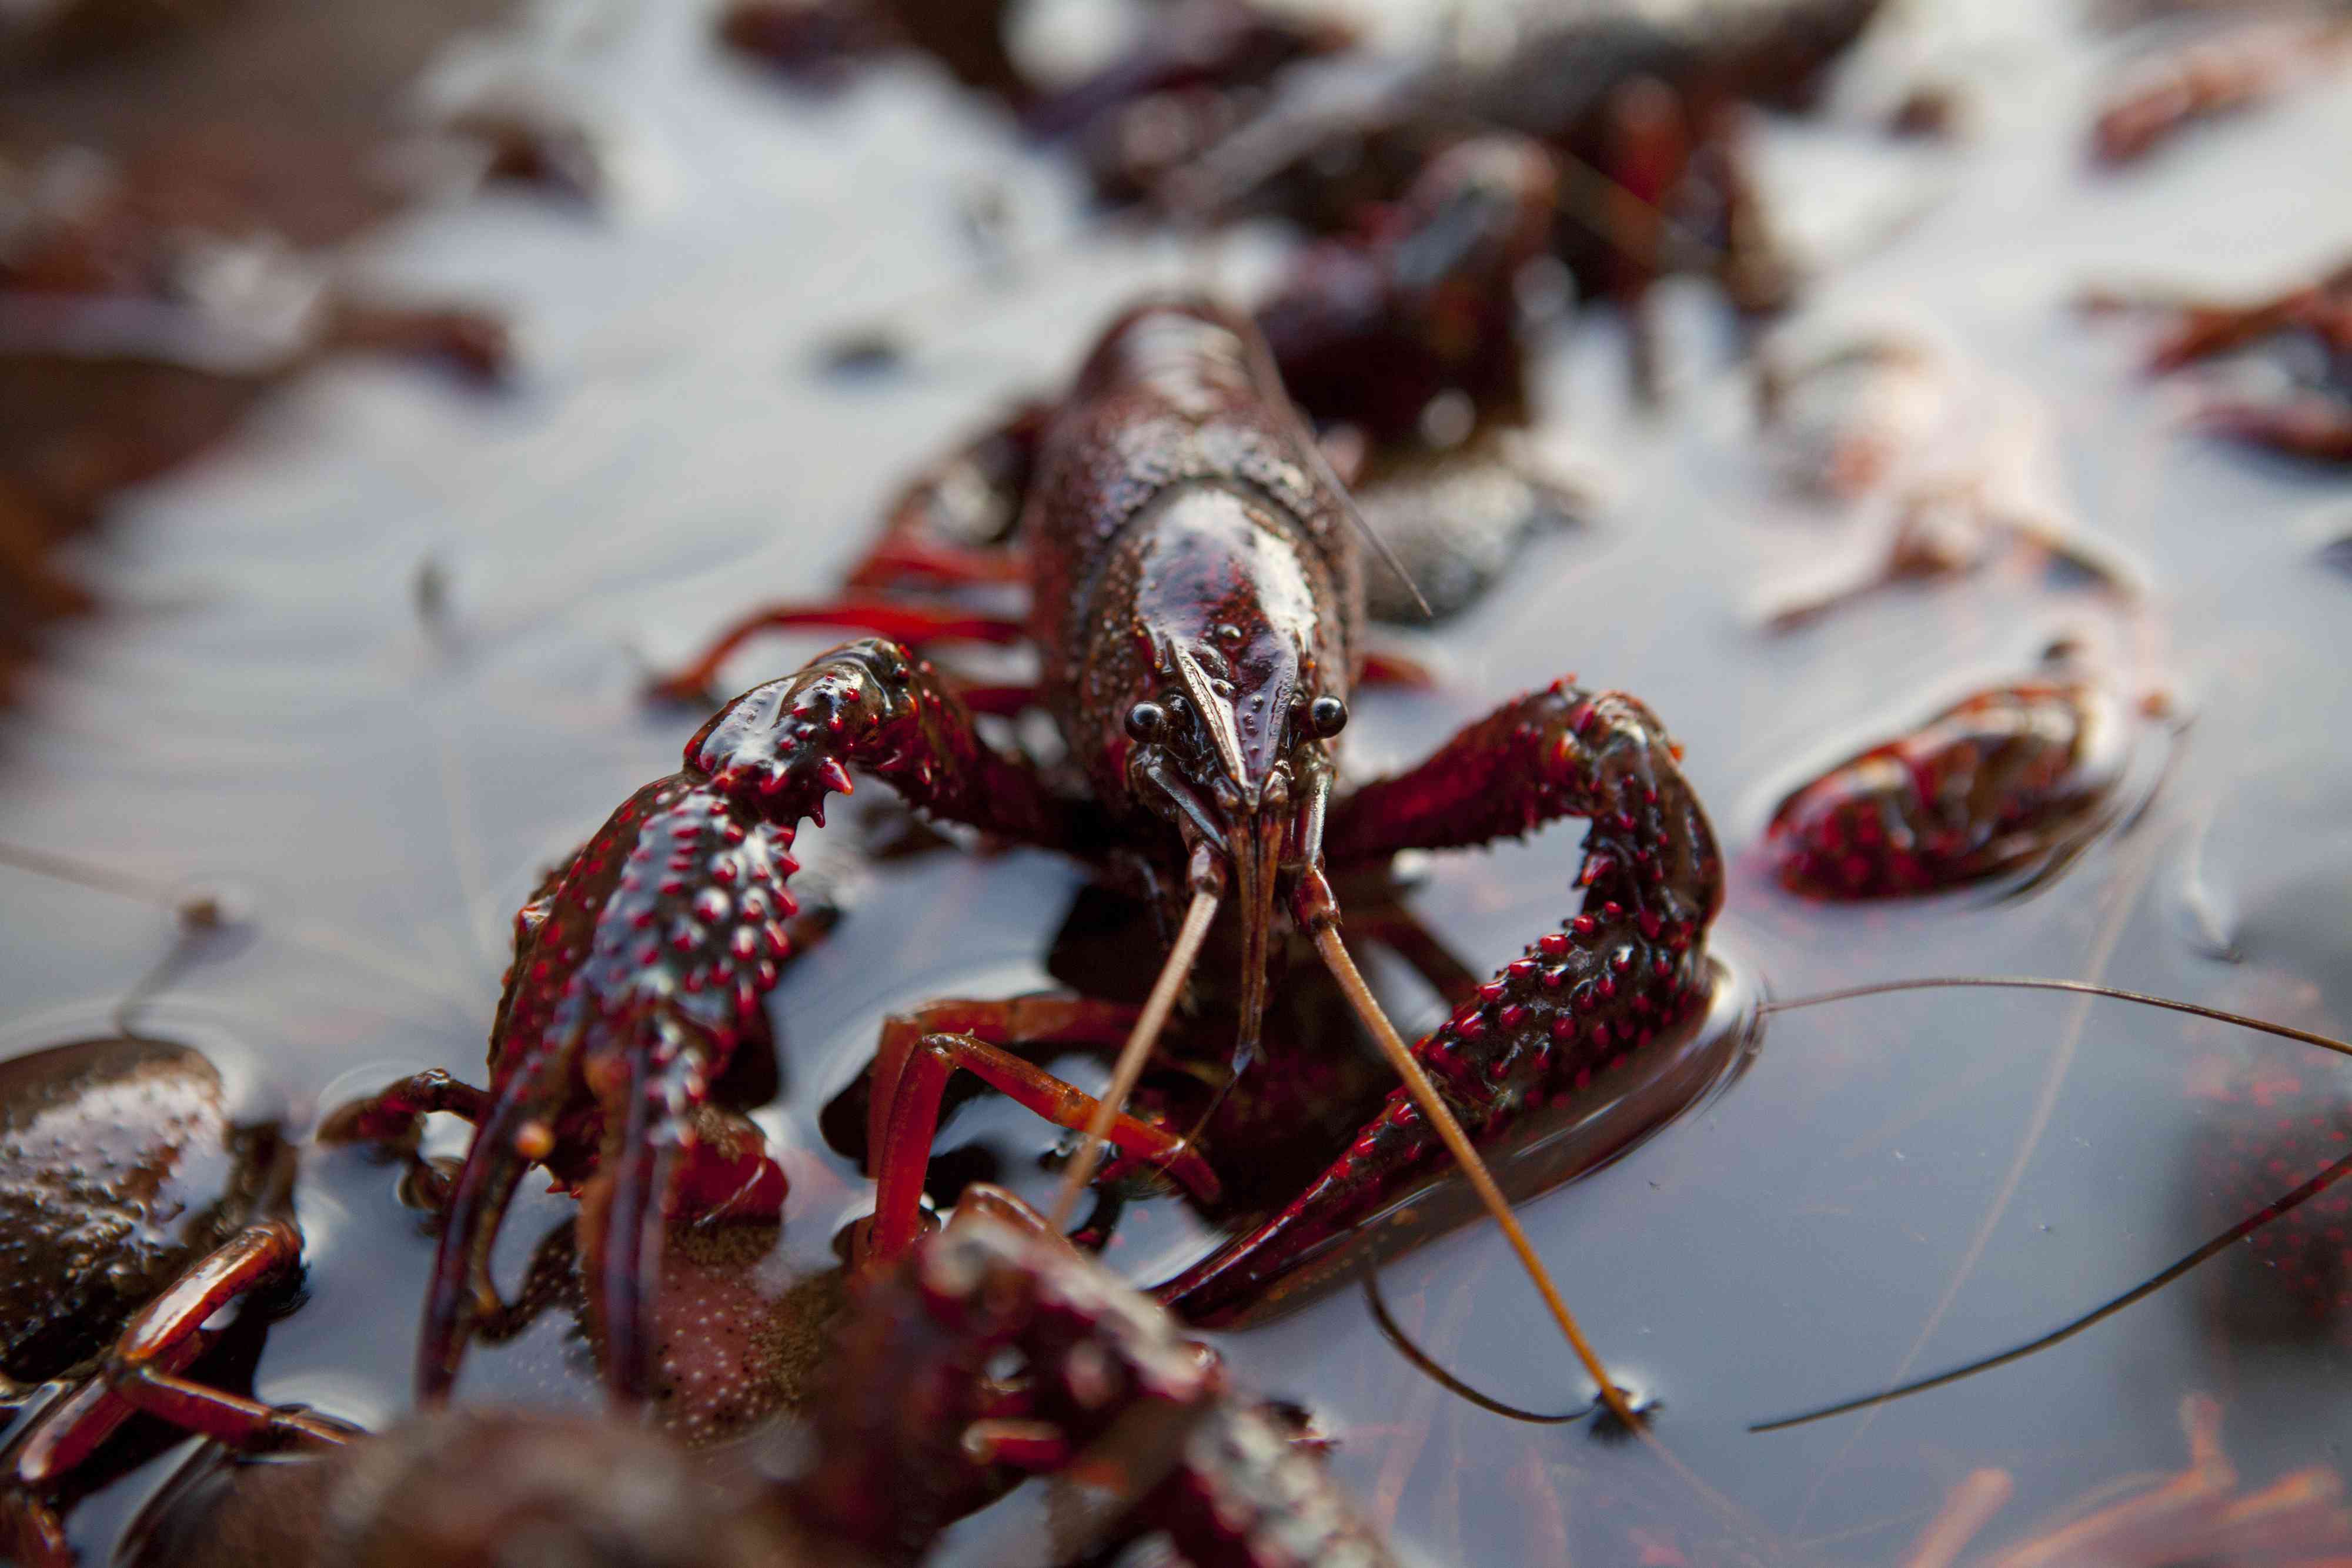 In Louisiana, a Crawfish Shortage Is Threatening a Way of Life